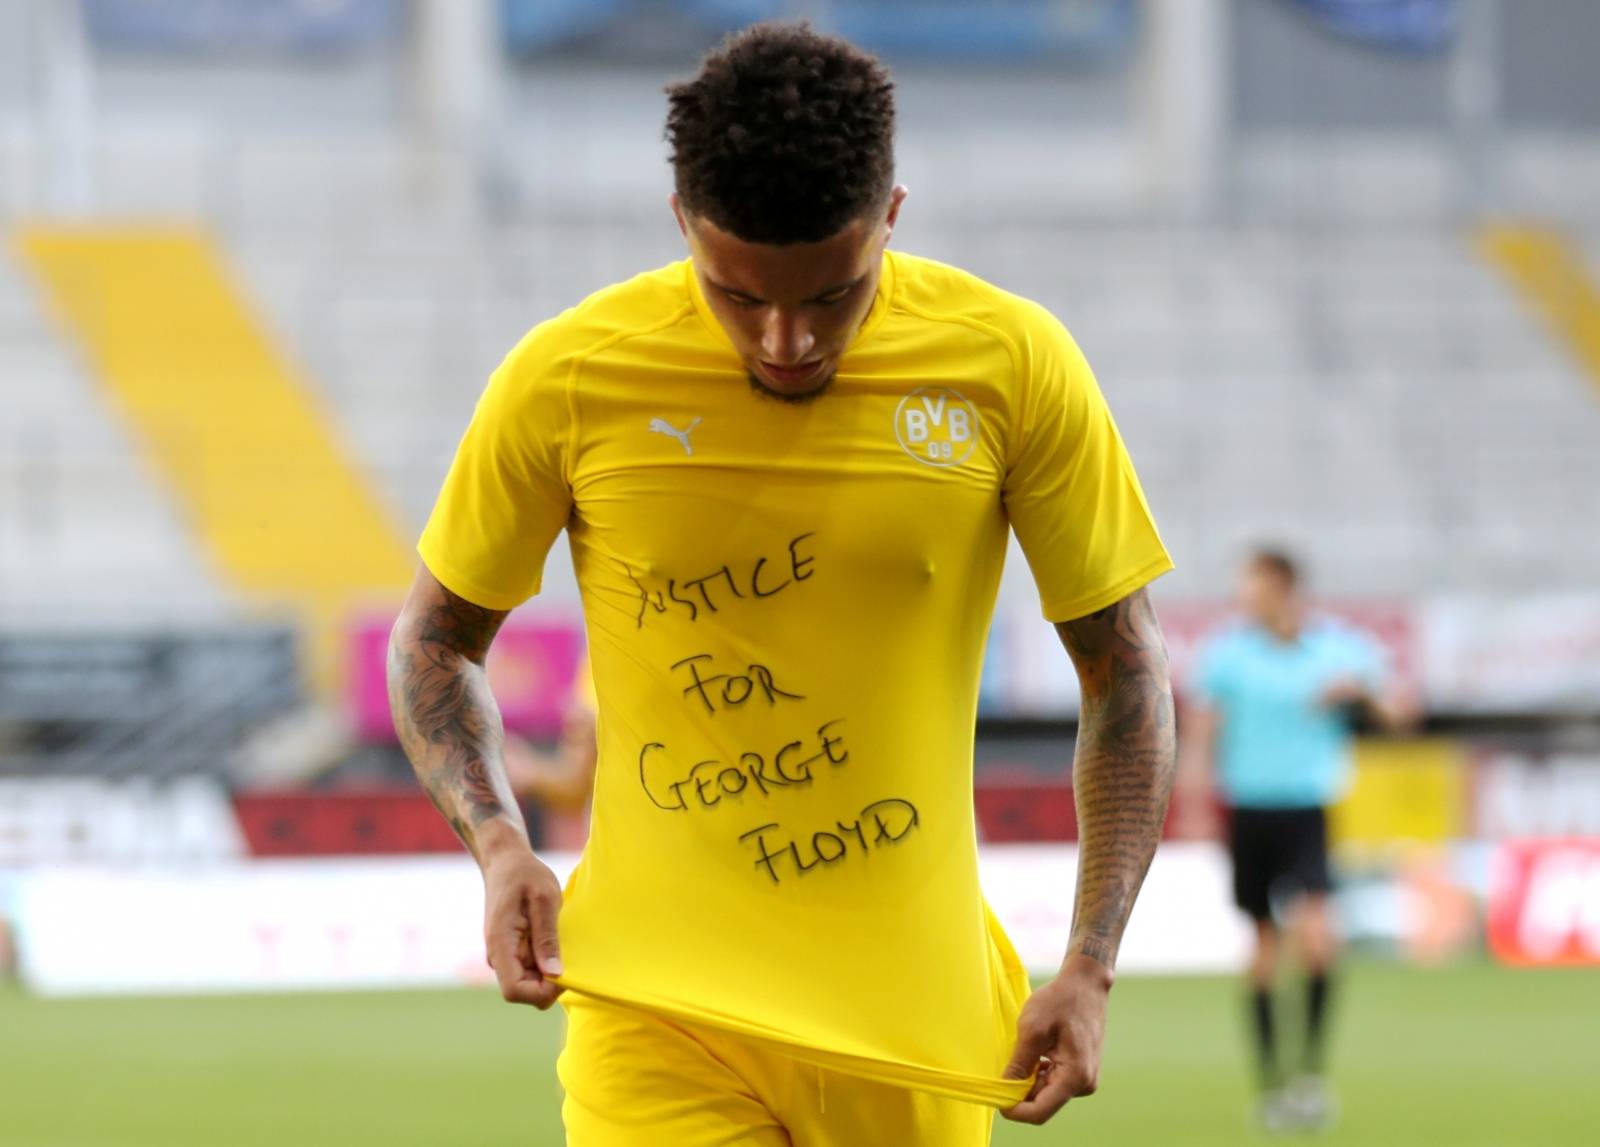 FILE PHOTO: Dortmund's Jadon Sancho celebrates scoring their second goal with a 'Justice for George Floyd' shirt, as play resumes behind closed doors following the outbreak of the coronavirus disease